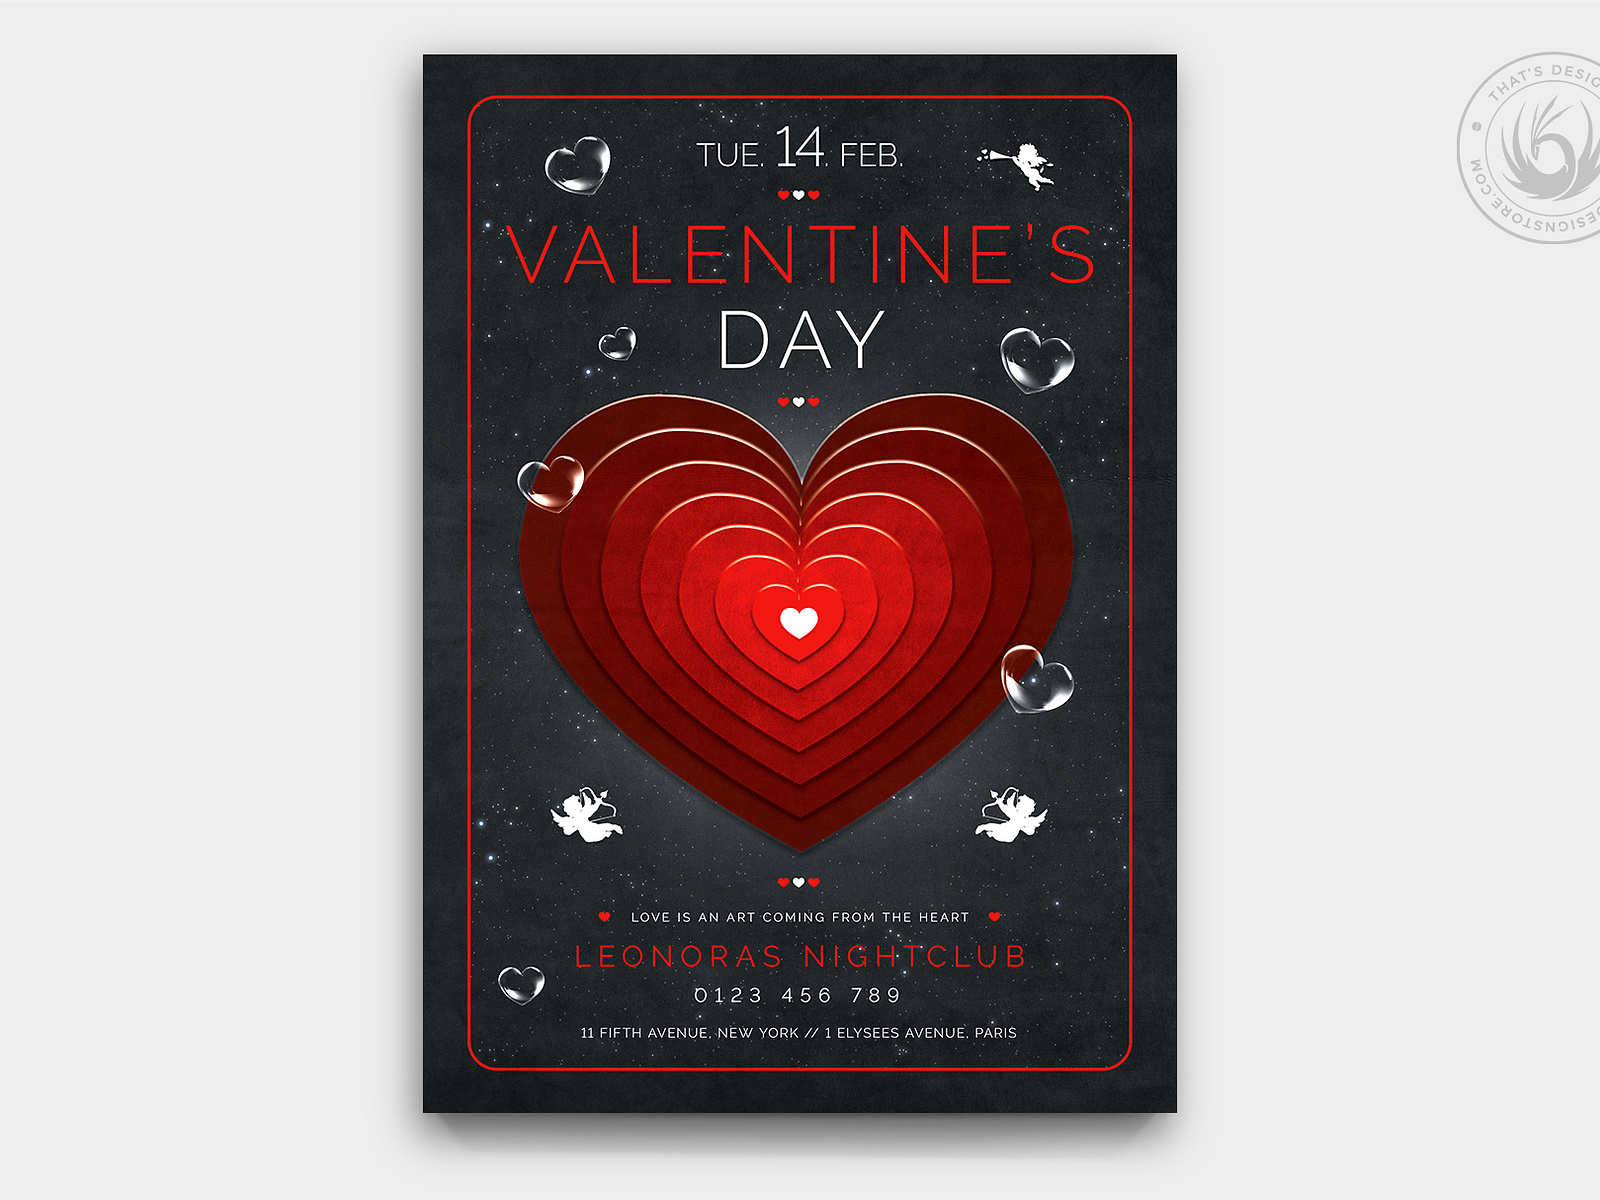 Valentines Day Flyer Template V27 by Lionel Laboureur on Dribbble